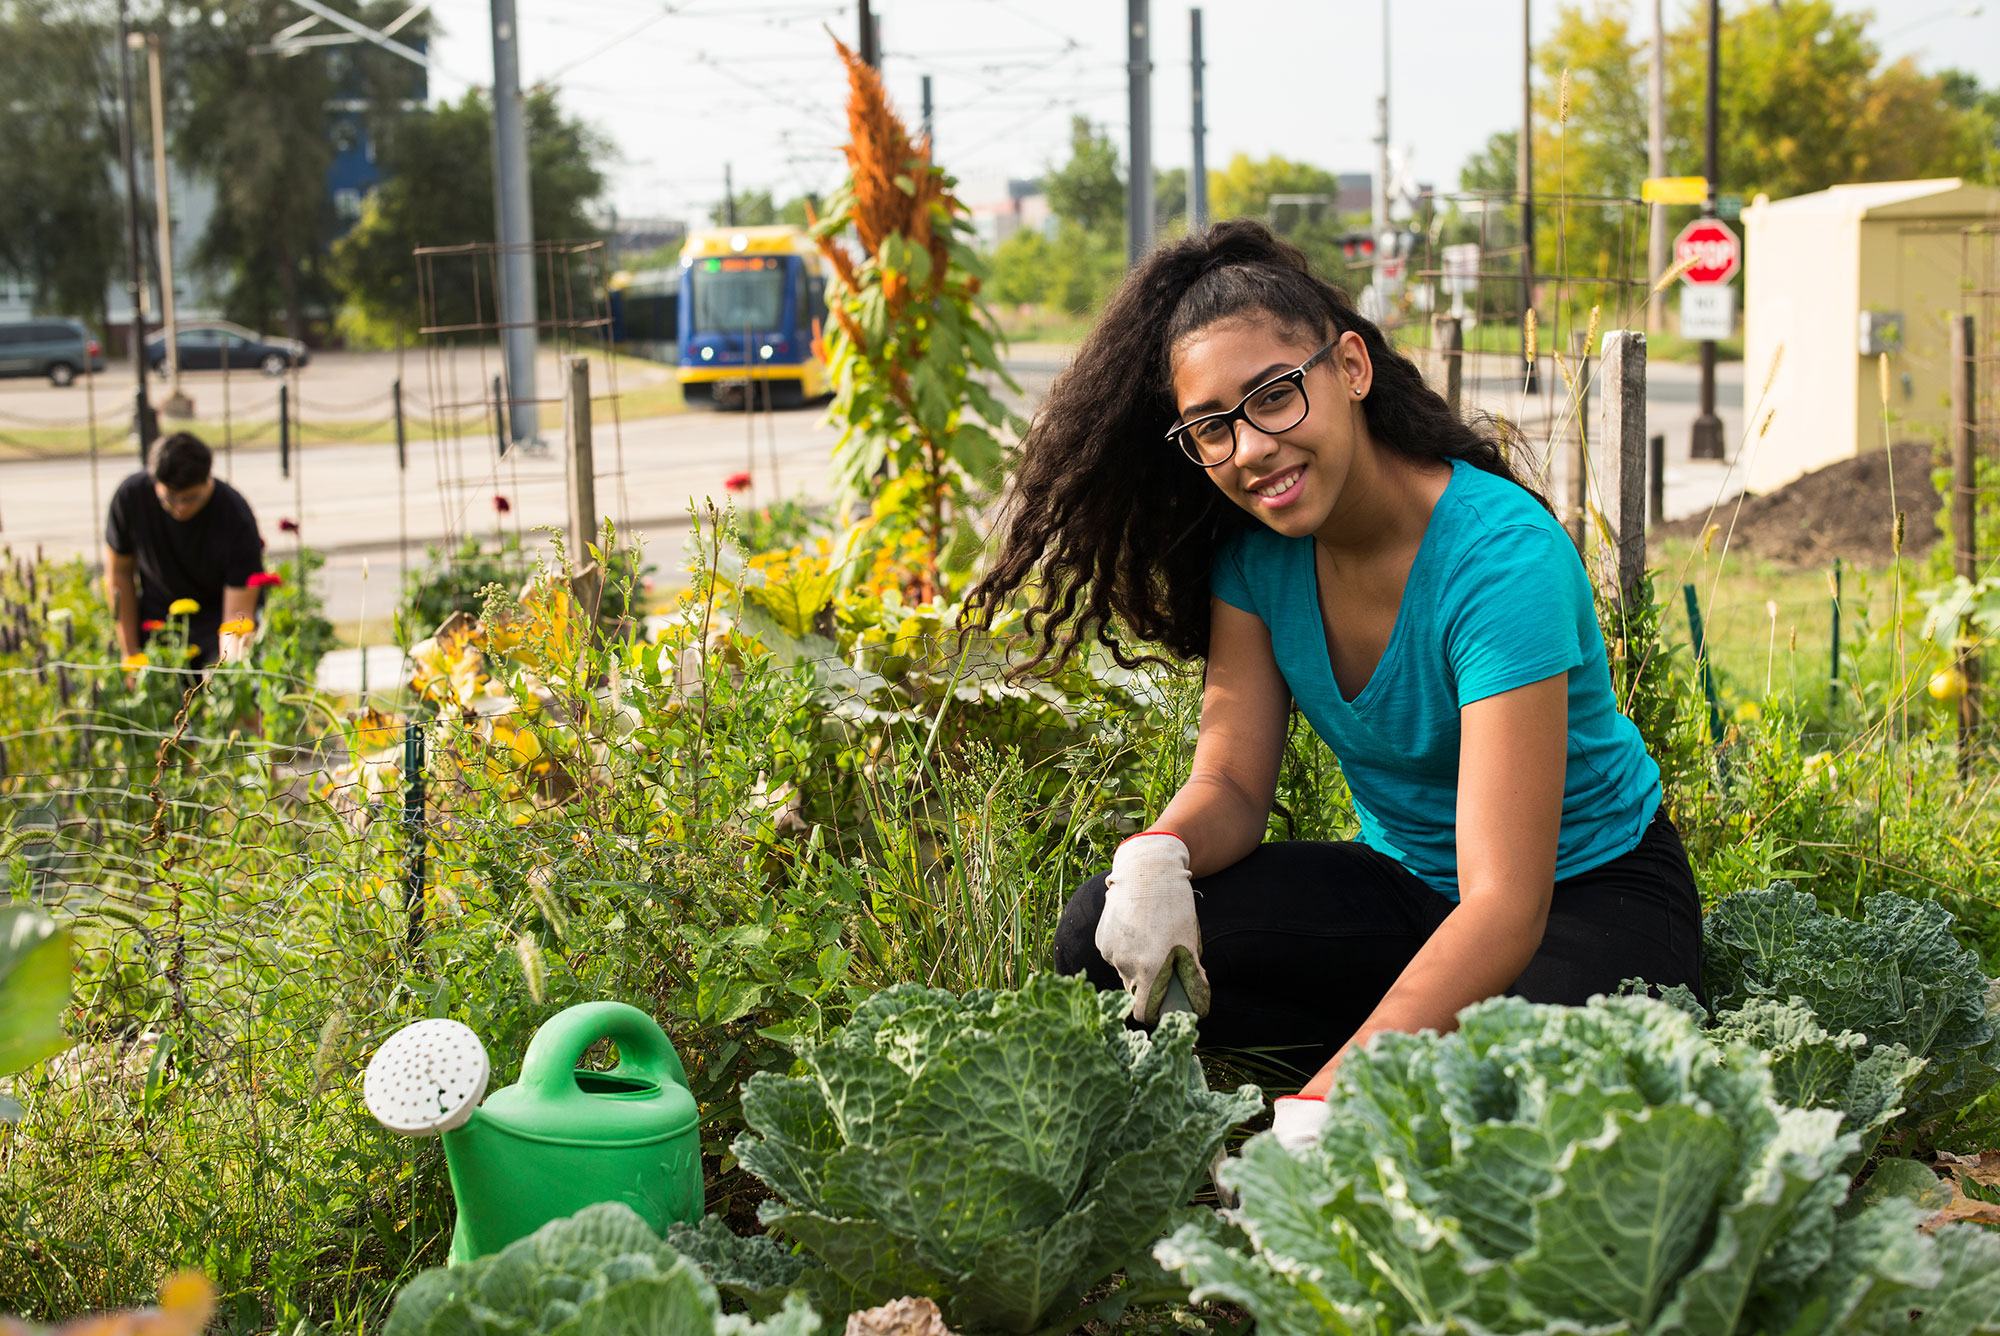 Residents tend beds of cabbage in Bridal Veil Gardens, a recently developed park opposite a light-rail station in MinneapolisResidents tend beds of cabbage in Bridal Veil Gardens, a recently developed park opposite a light-rail station in Minneapolis